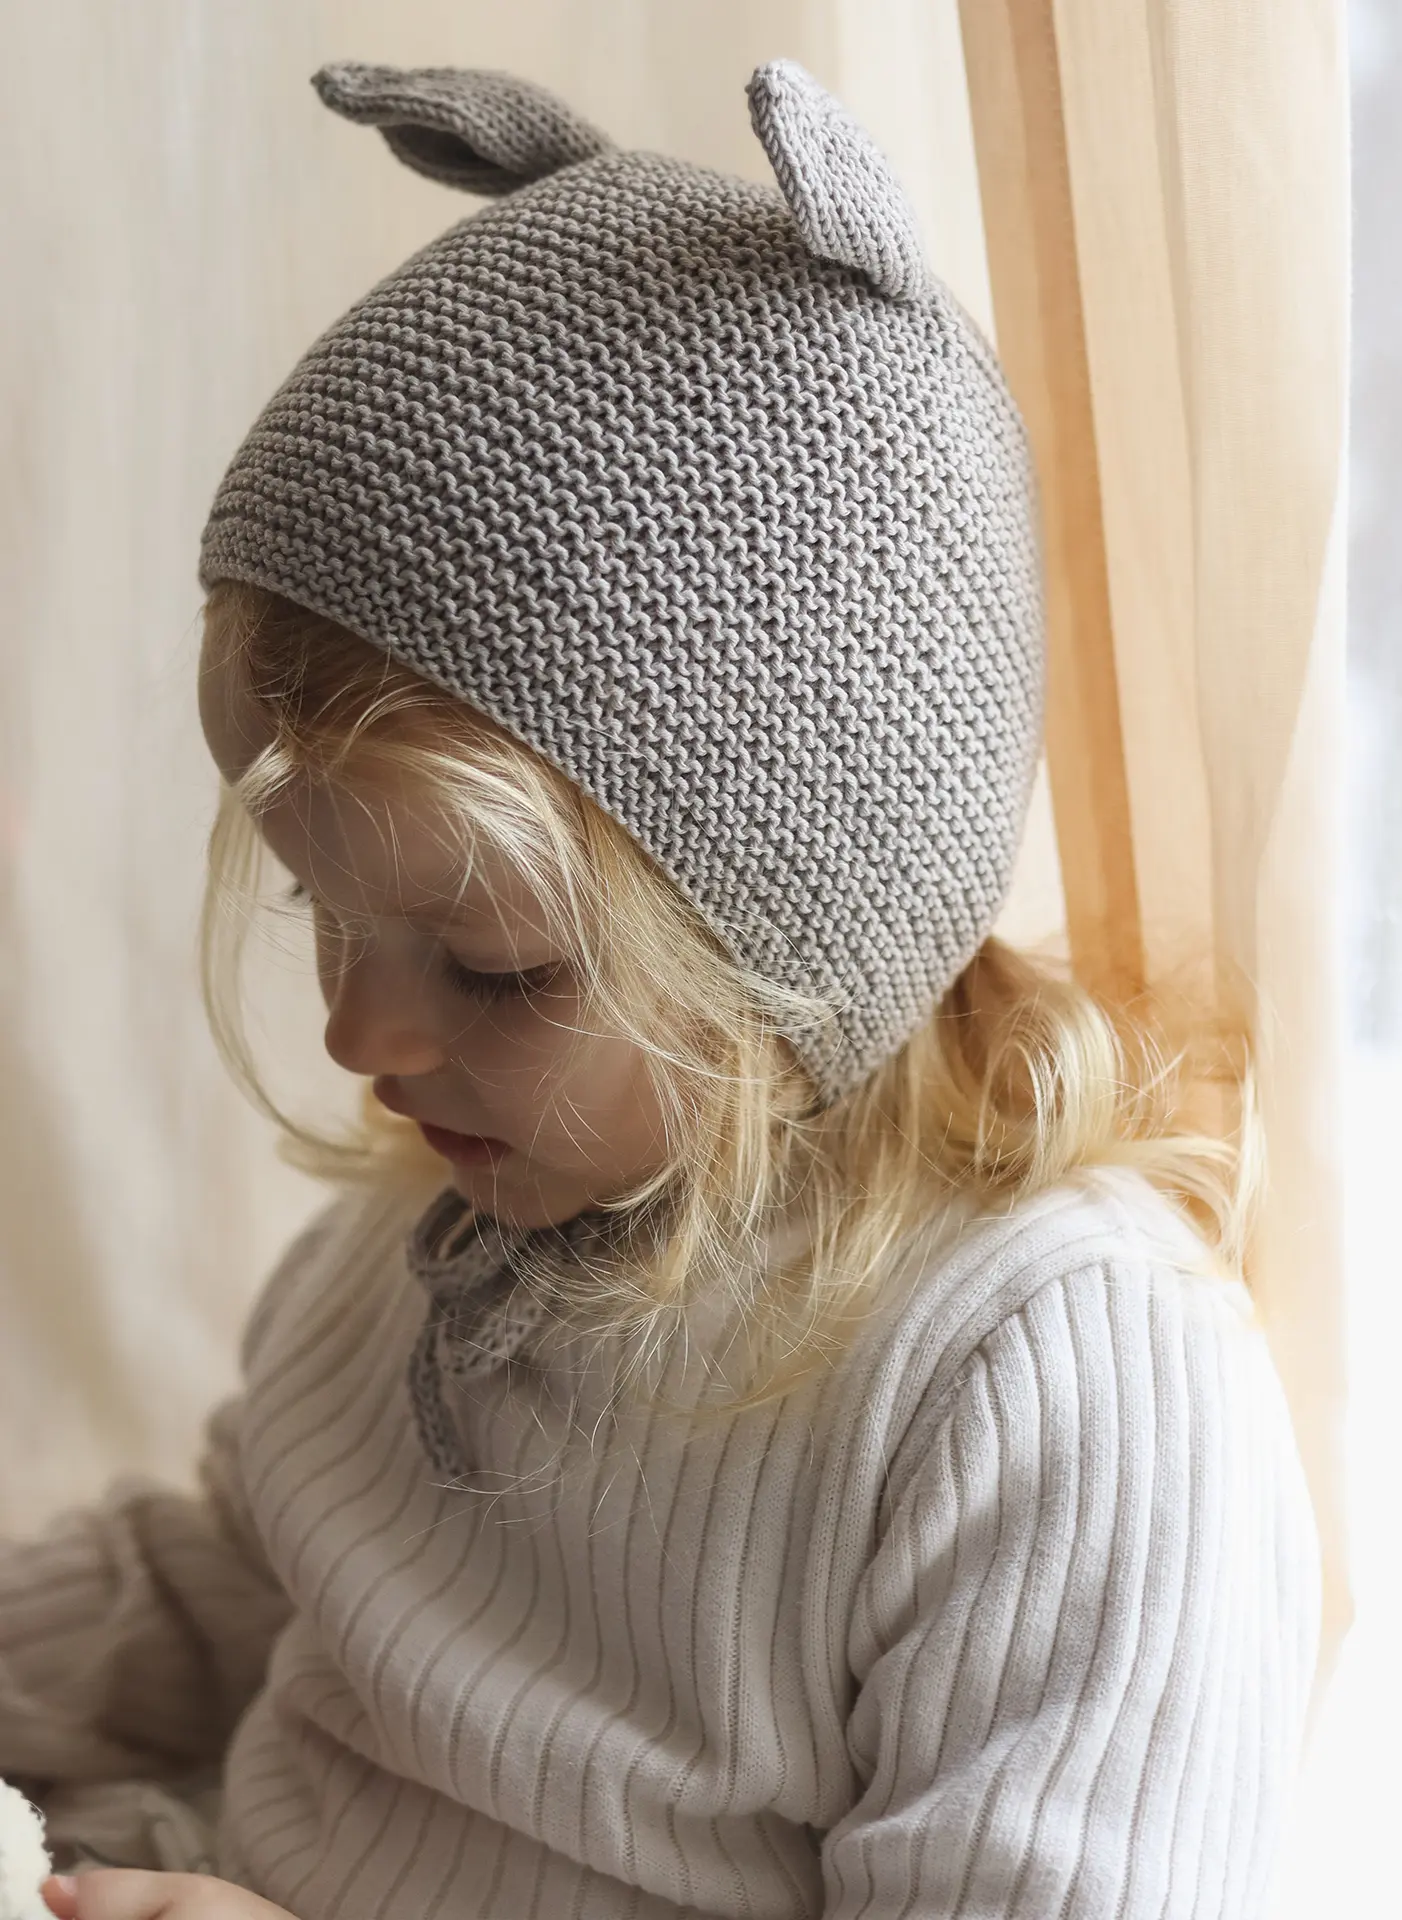 Smal girl wearing hand knitted hat with animal ears in gray color